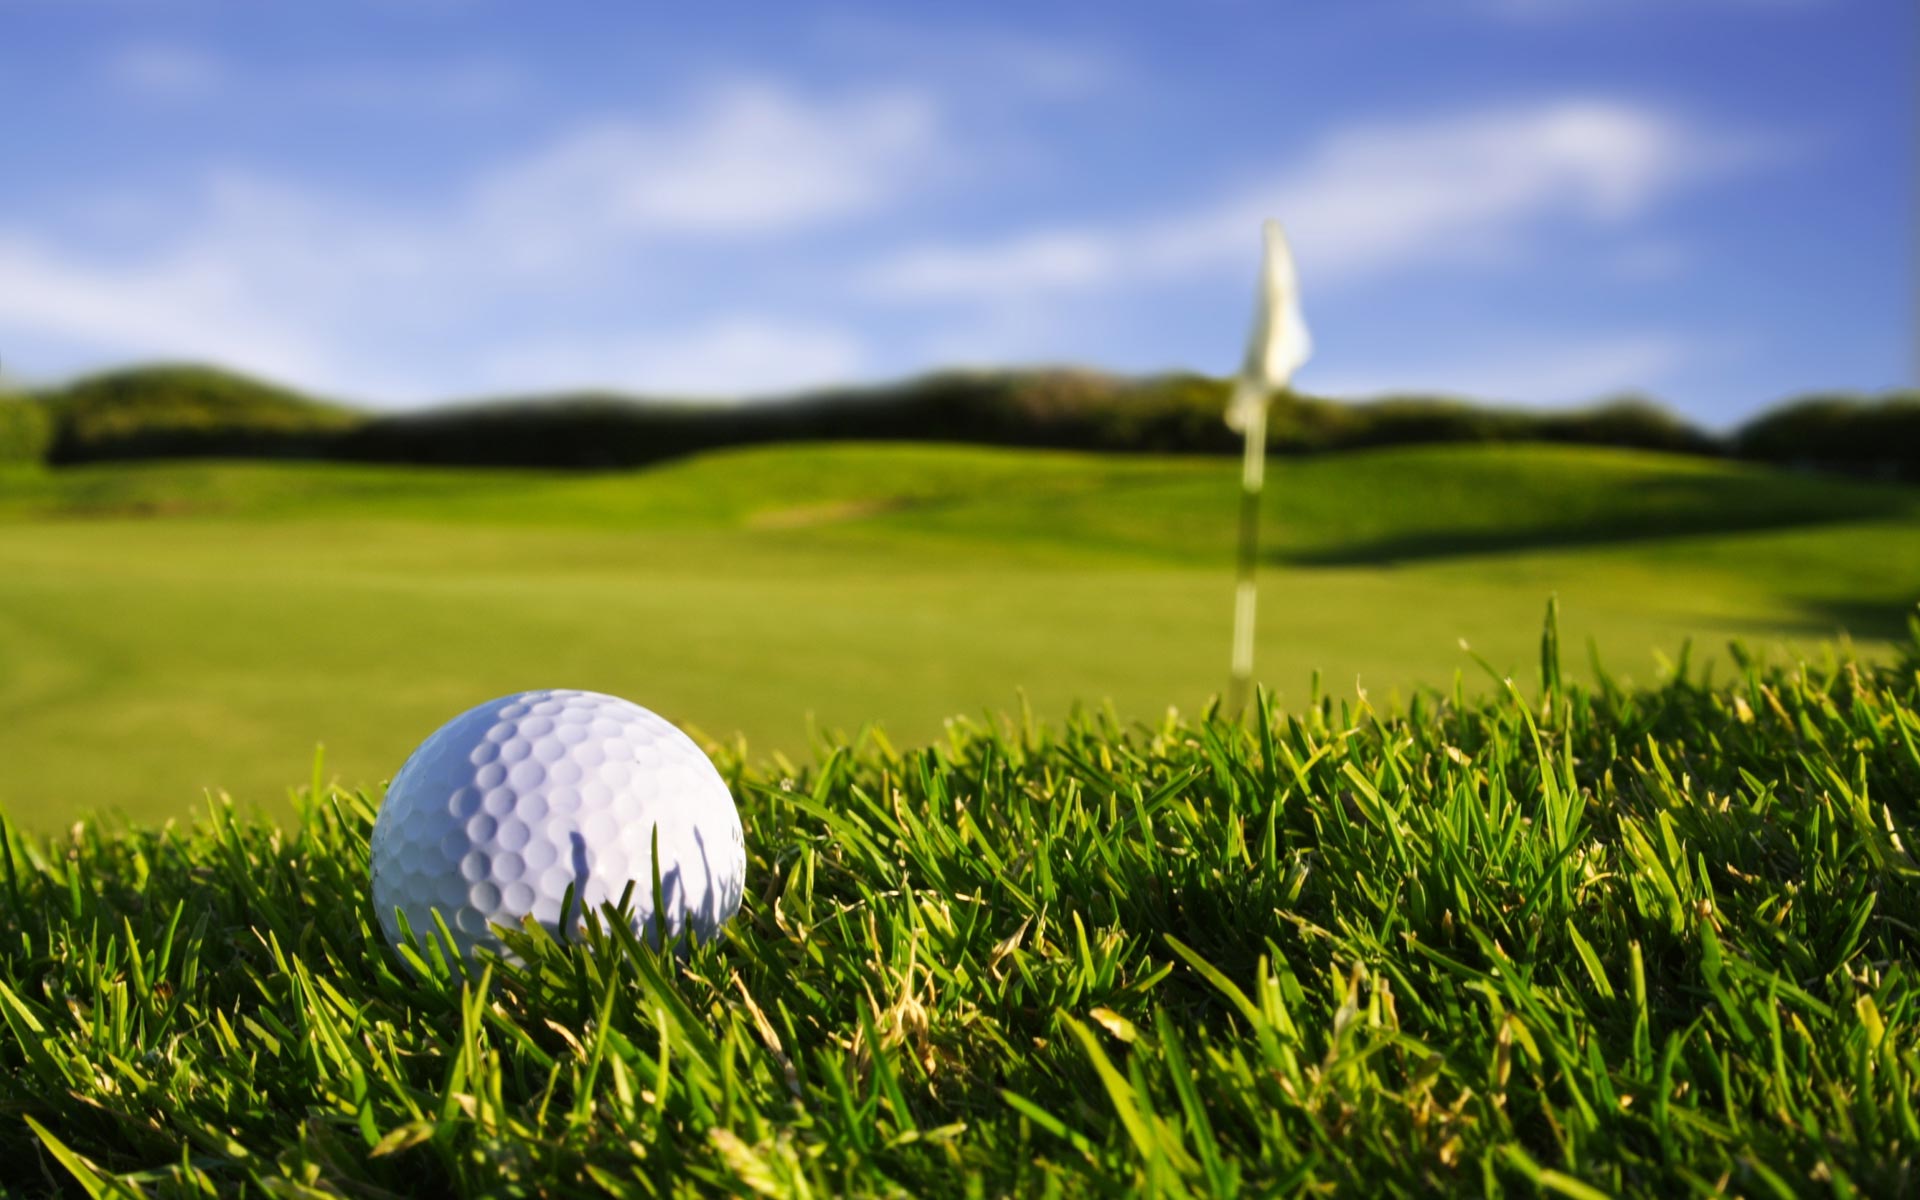 Hd Golf Course Wallpaper 3103 Hd Wallpapers in Sports   Imagescicom